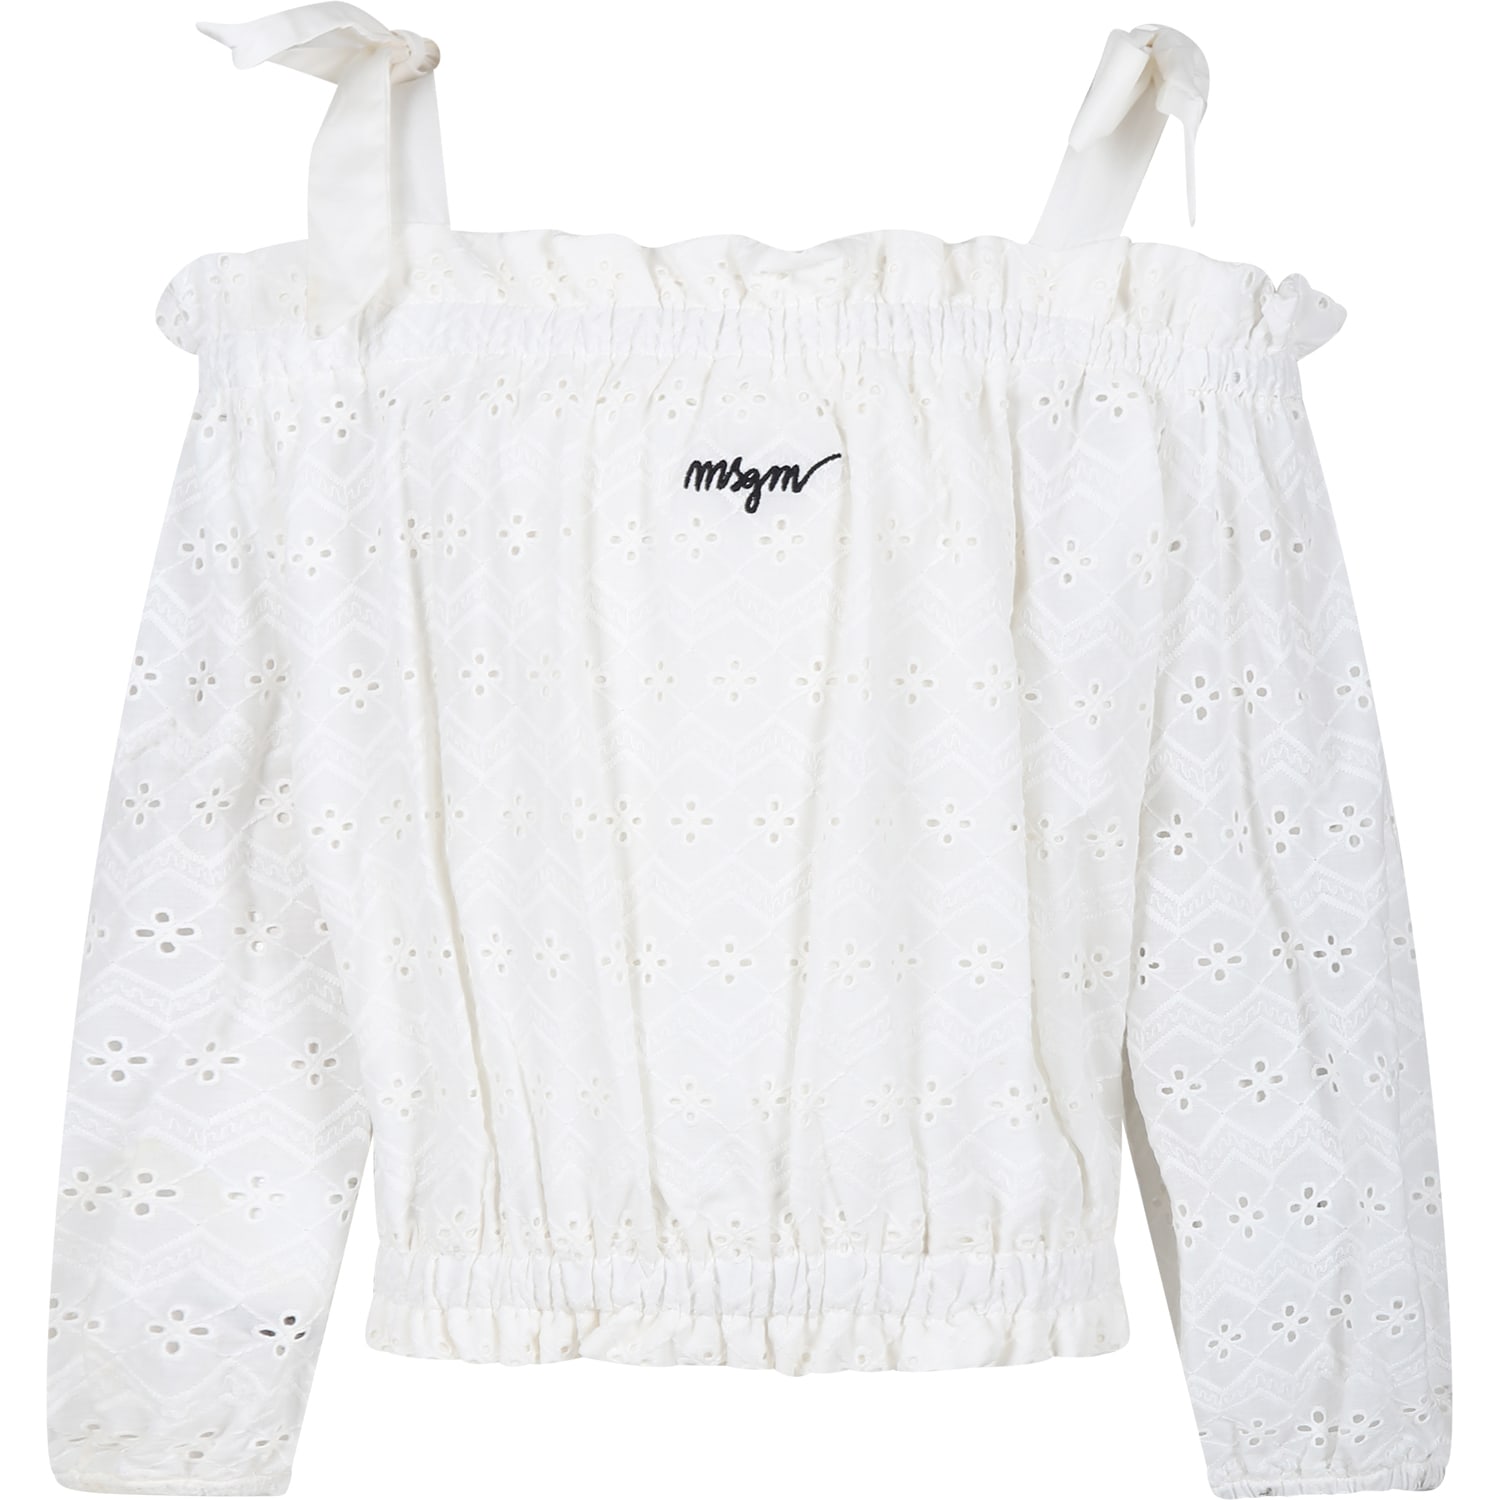 Msgm Kids' White Top For Girl With Broderie Anglaise In Metallic